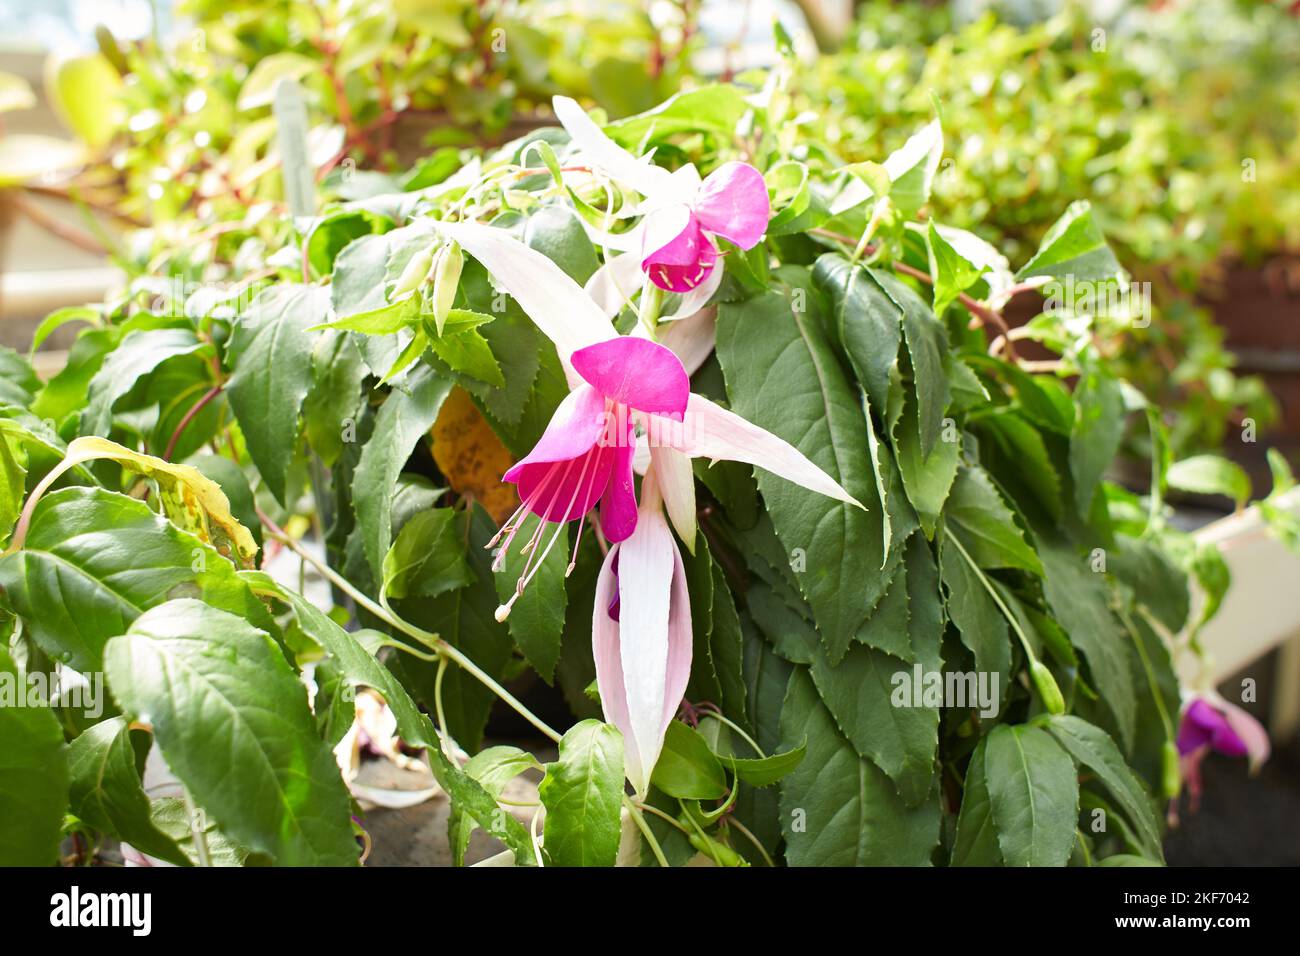 Large number of blooming Pink and white Fuchsia flowers Stock Photo